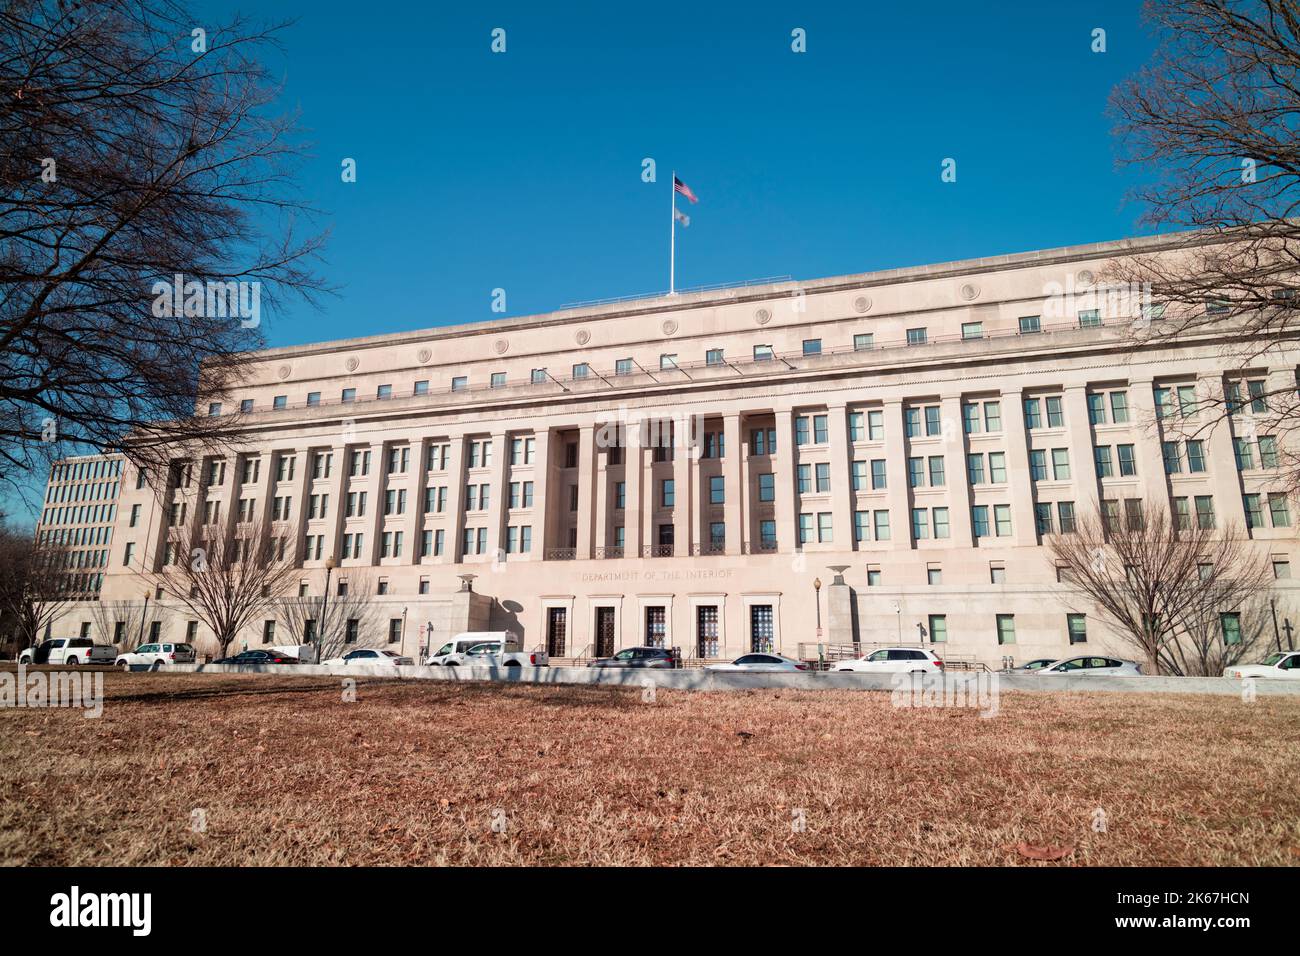 The Stewart Lee Udall Department of the Interior Building in Washington, D.C. on a sunny winter day. Low angle wide shot, cloudless sky, no people. Stock Photo